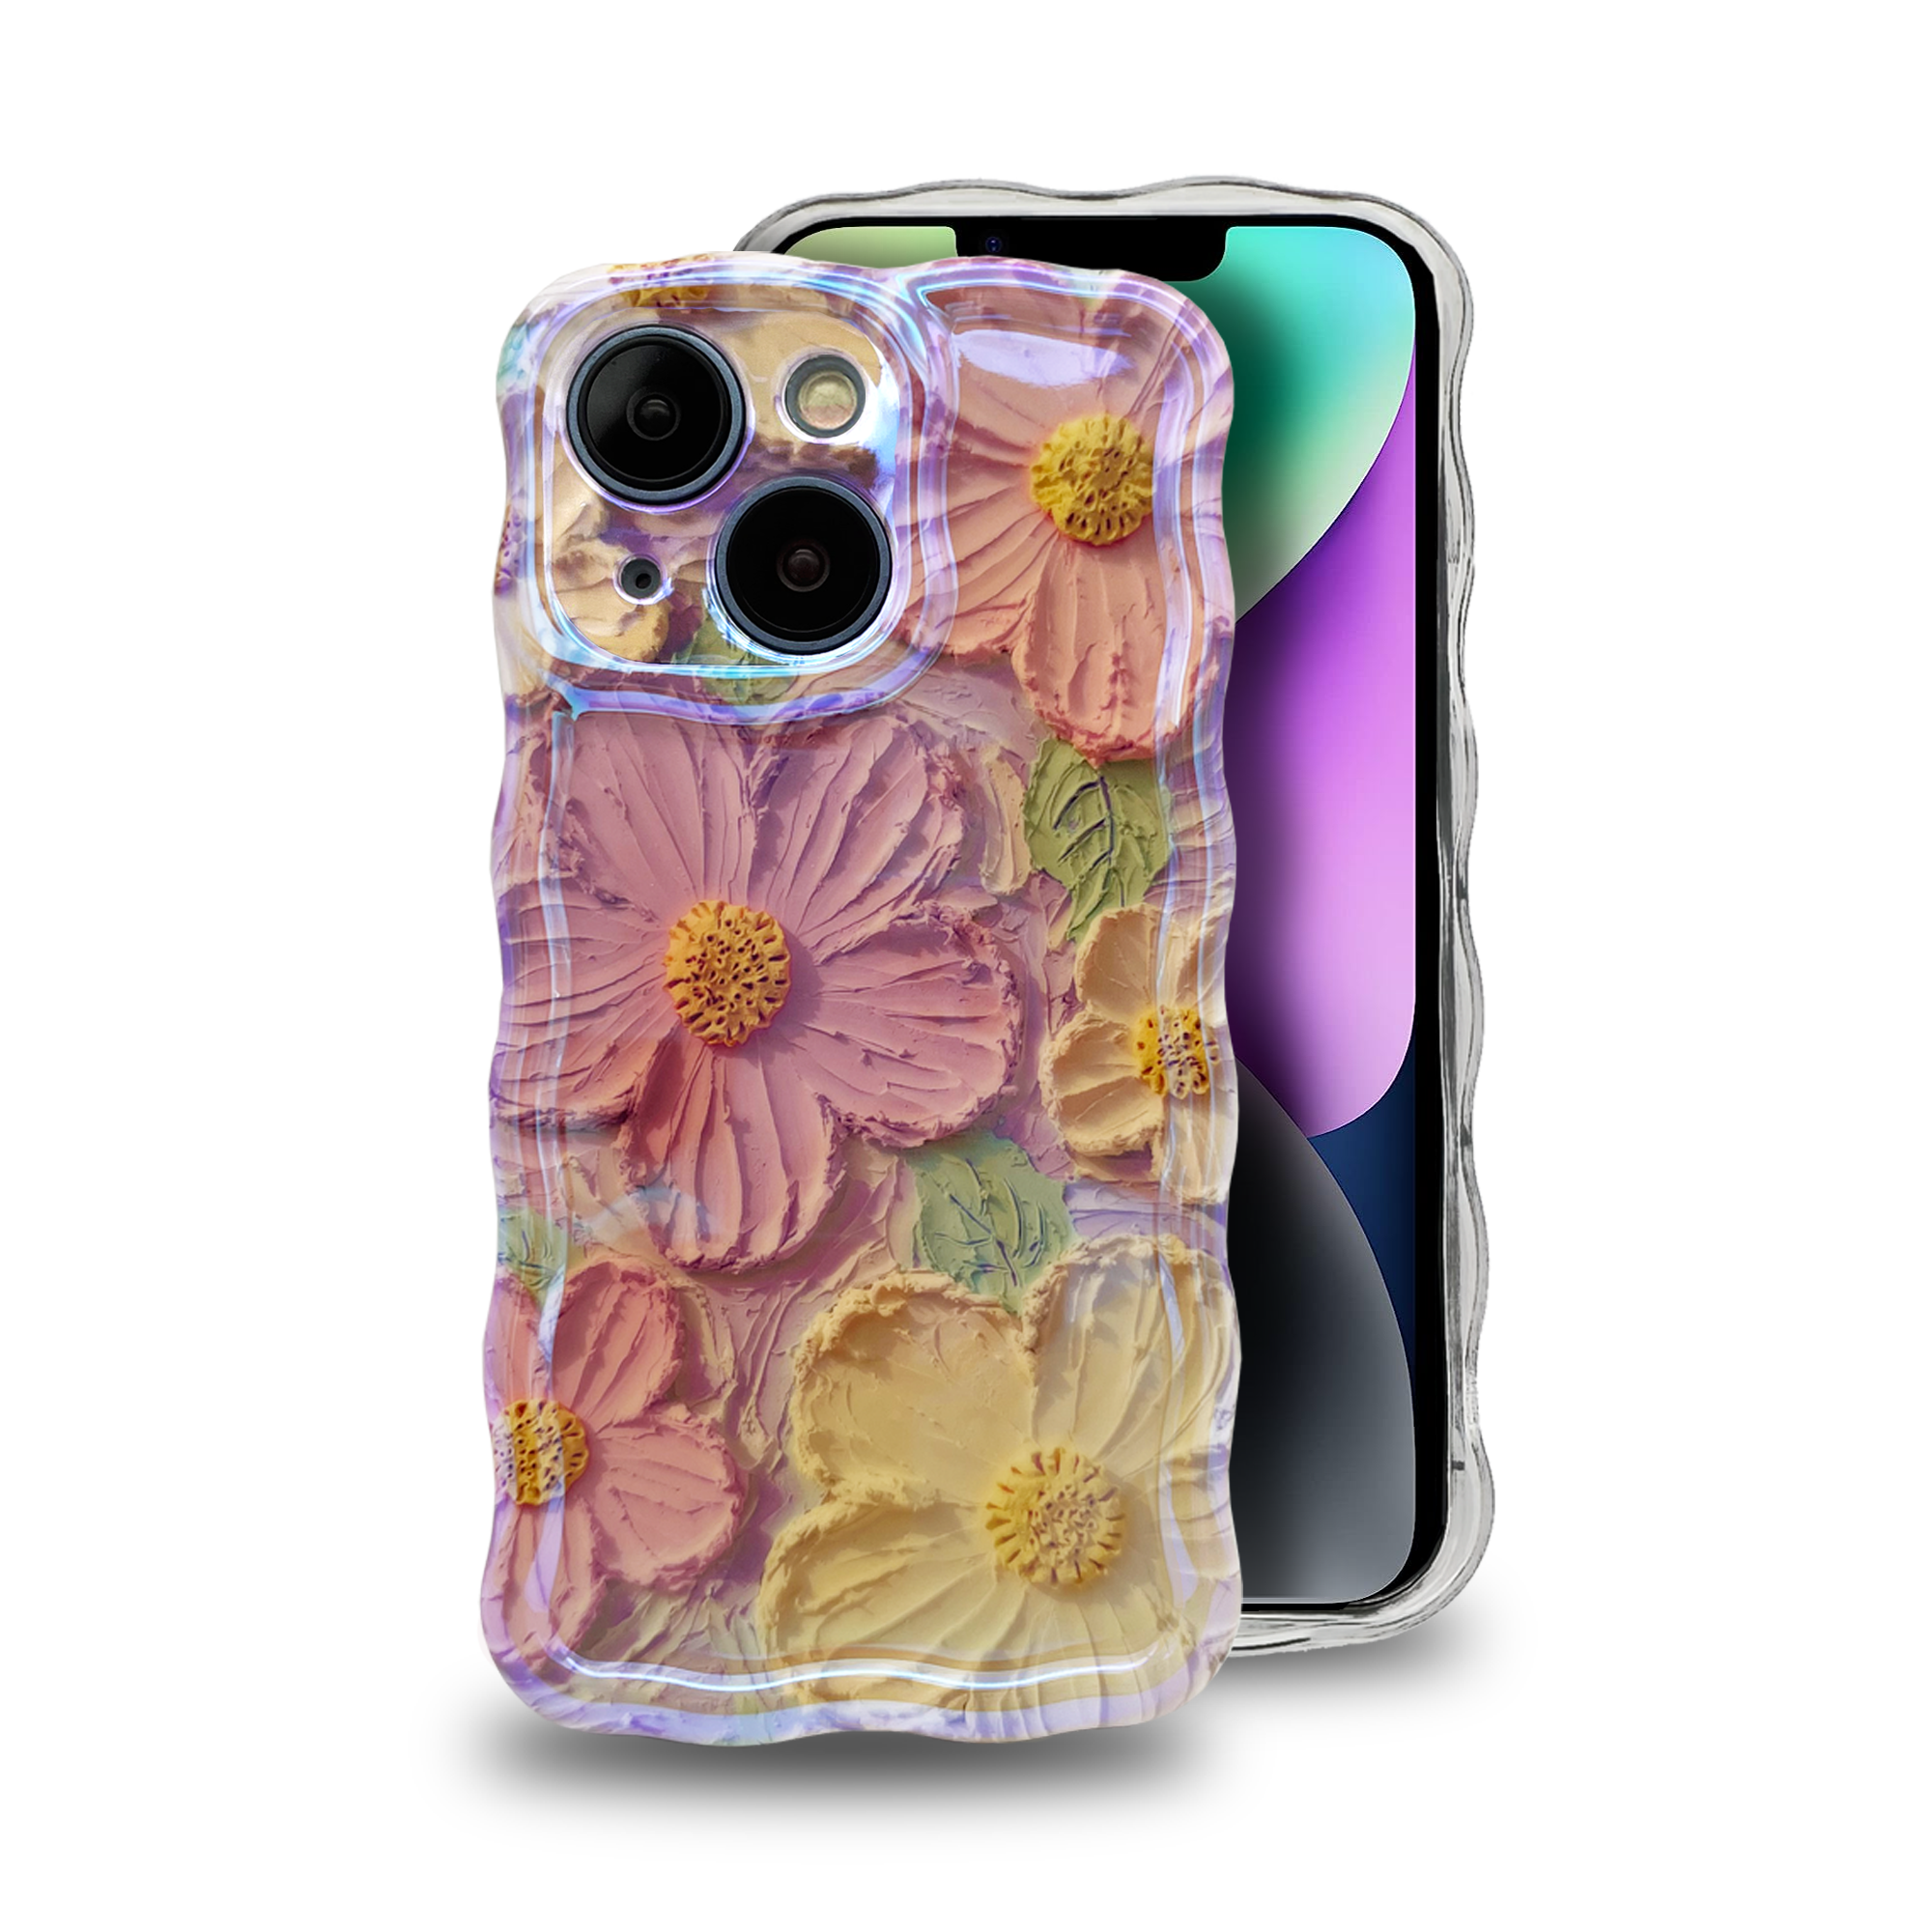 Curly Flower Cover iPhone